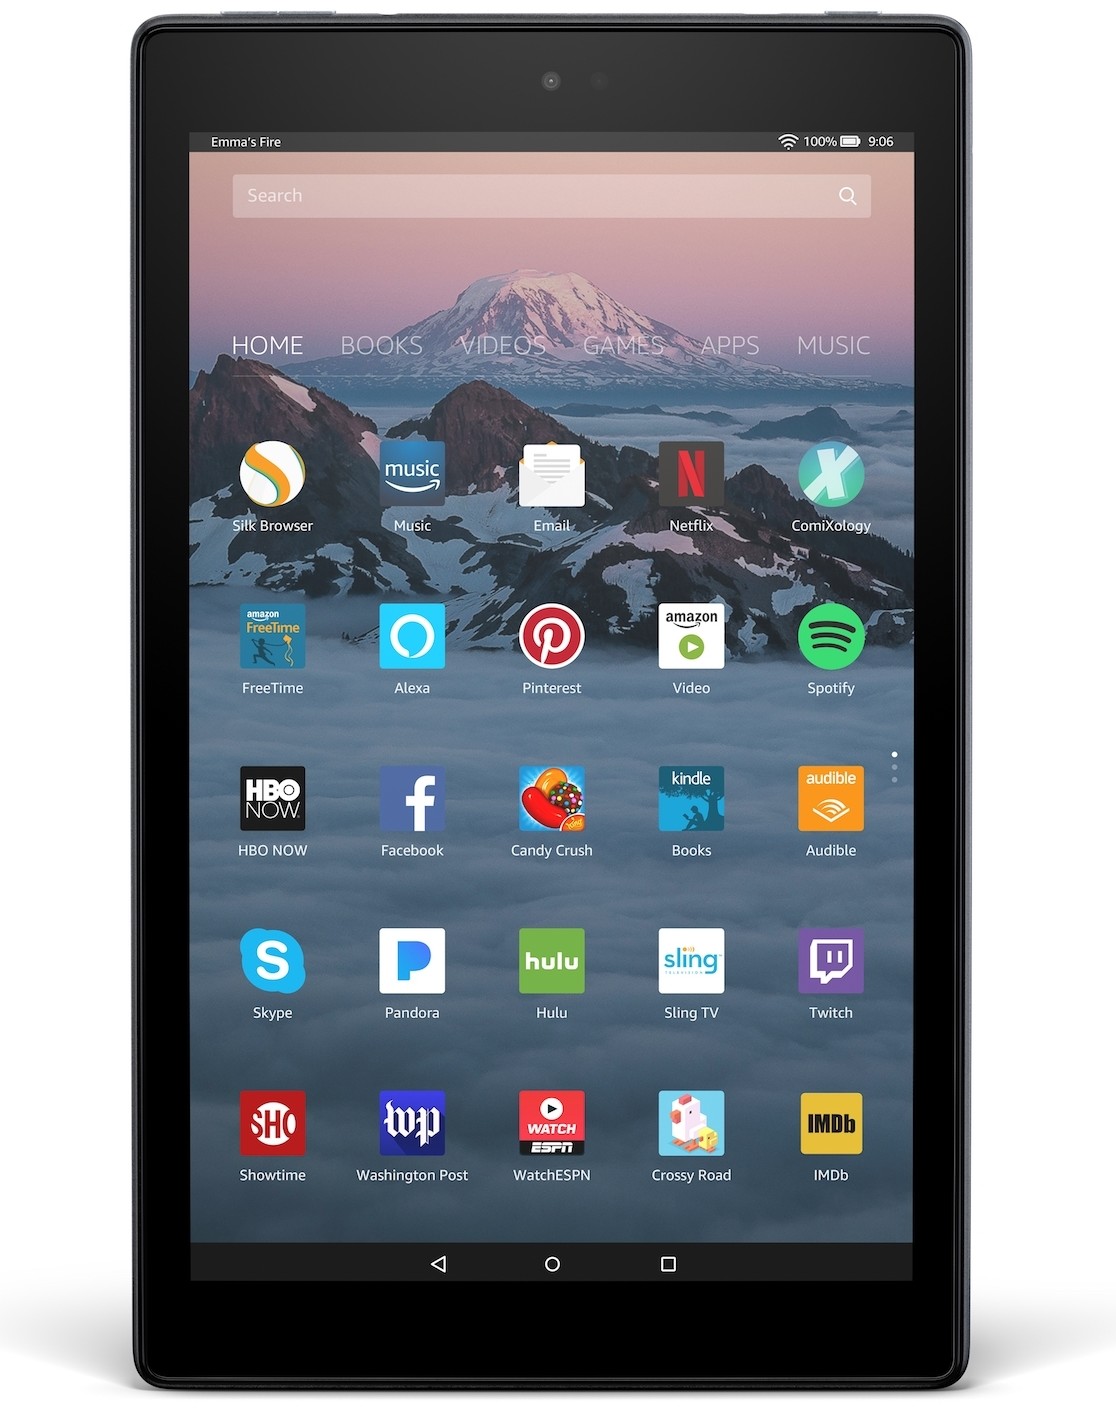 Amazon Fire HD 10 (2017) 64GB - Specs and Price - Phonegg